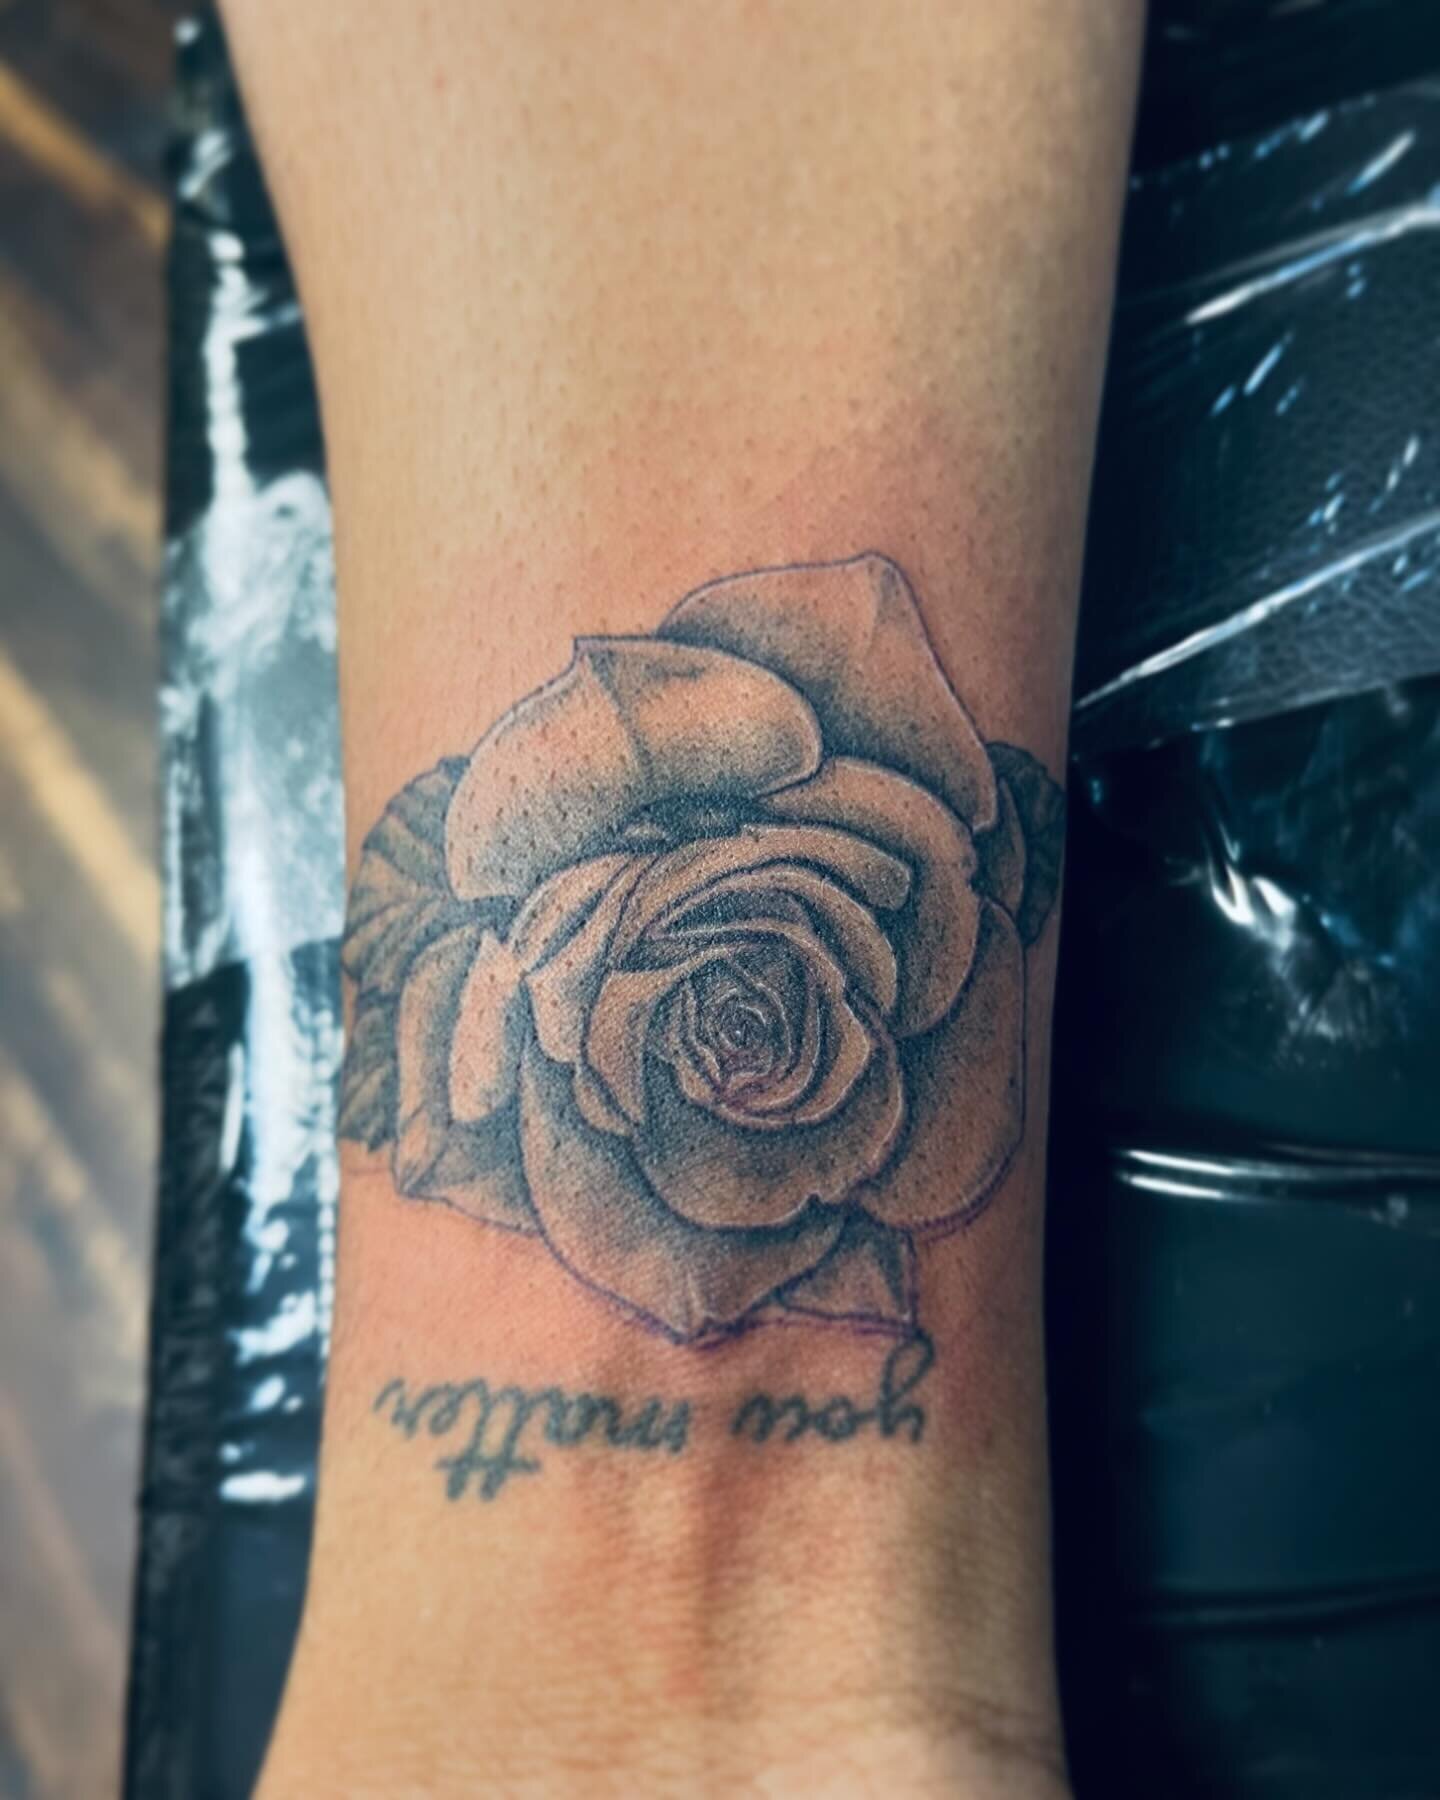 Lil Rose Tattoo! Single needle!!
(Lettering not done by me)
#rosetattoo #blackandgrey #blackandgreytattoo #rose #singleneedle #singleneedletattoo #michigantattooartist #michigantattooers #ainsleyvtattoos